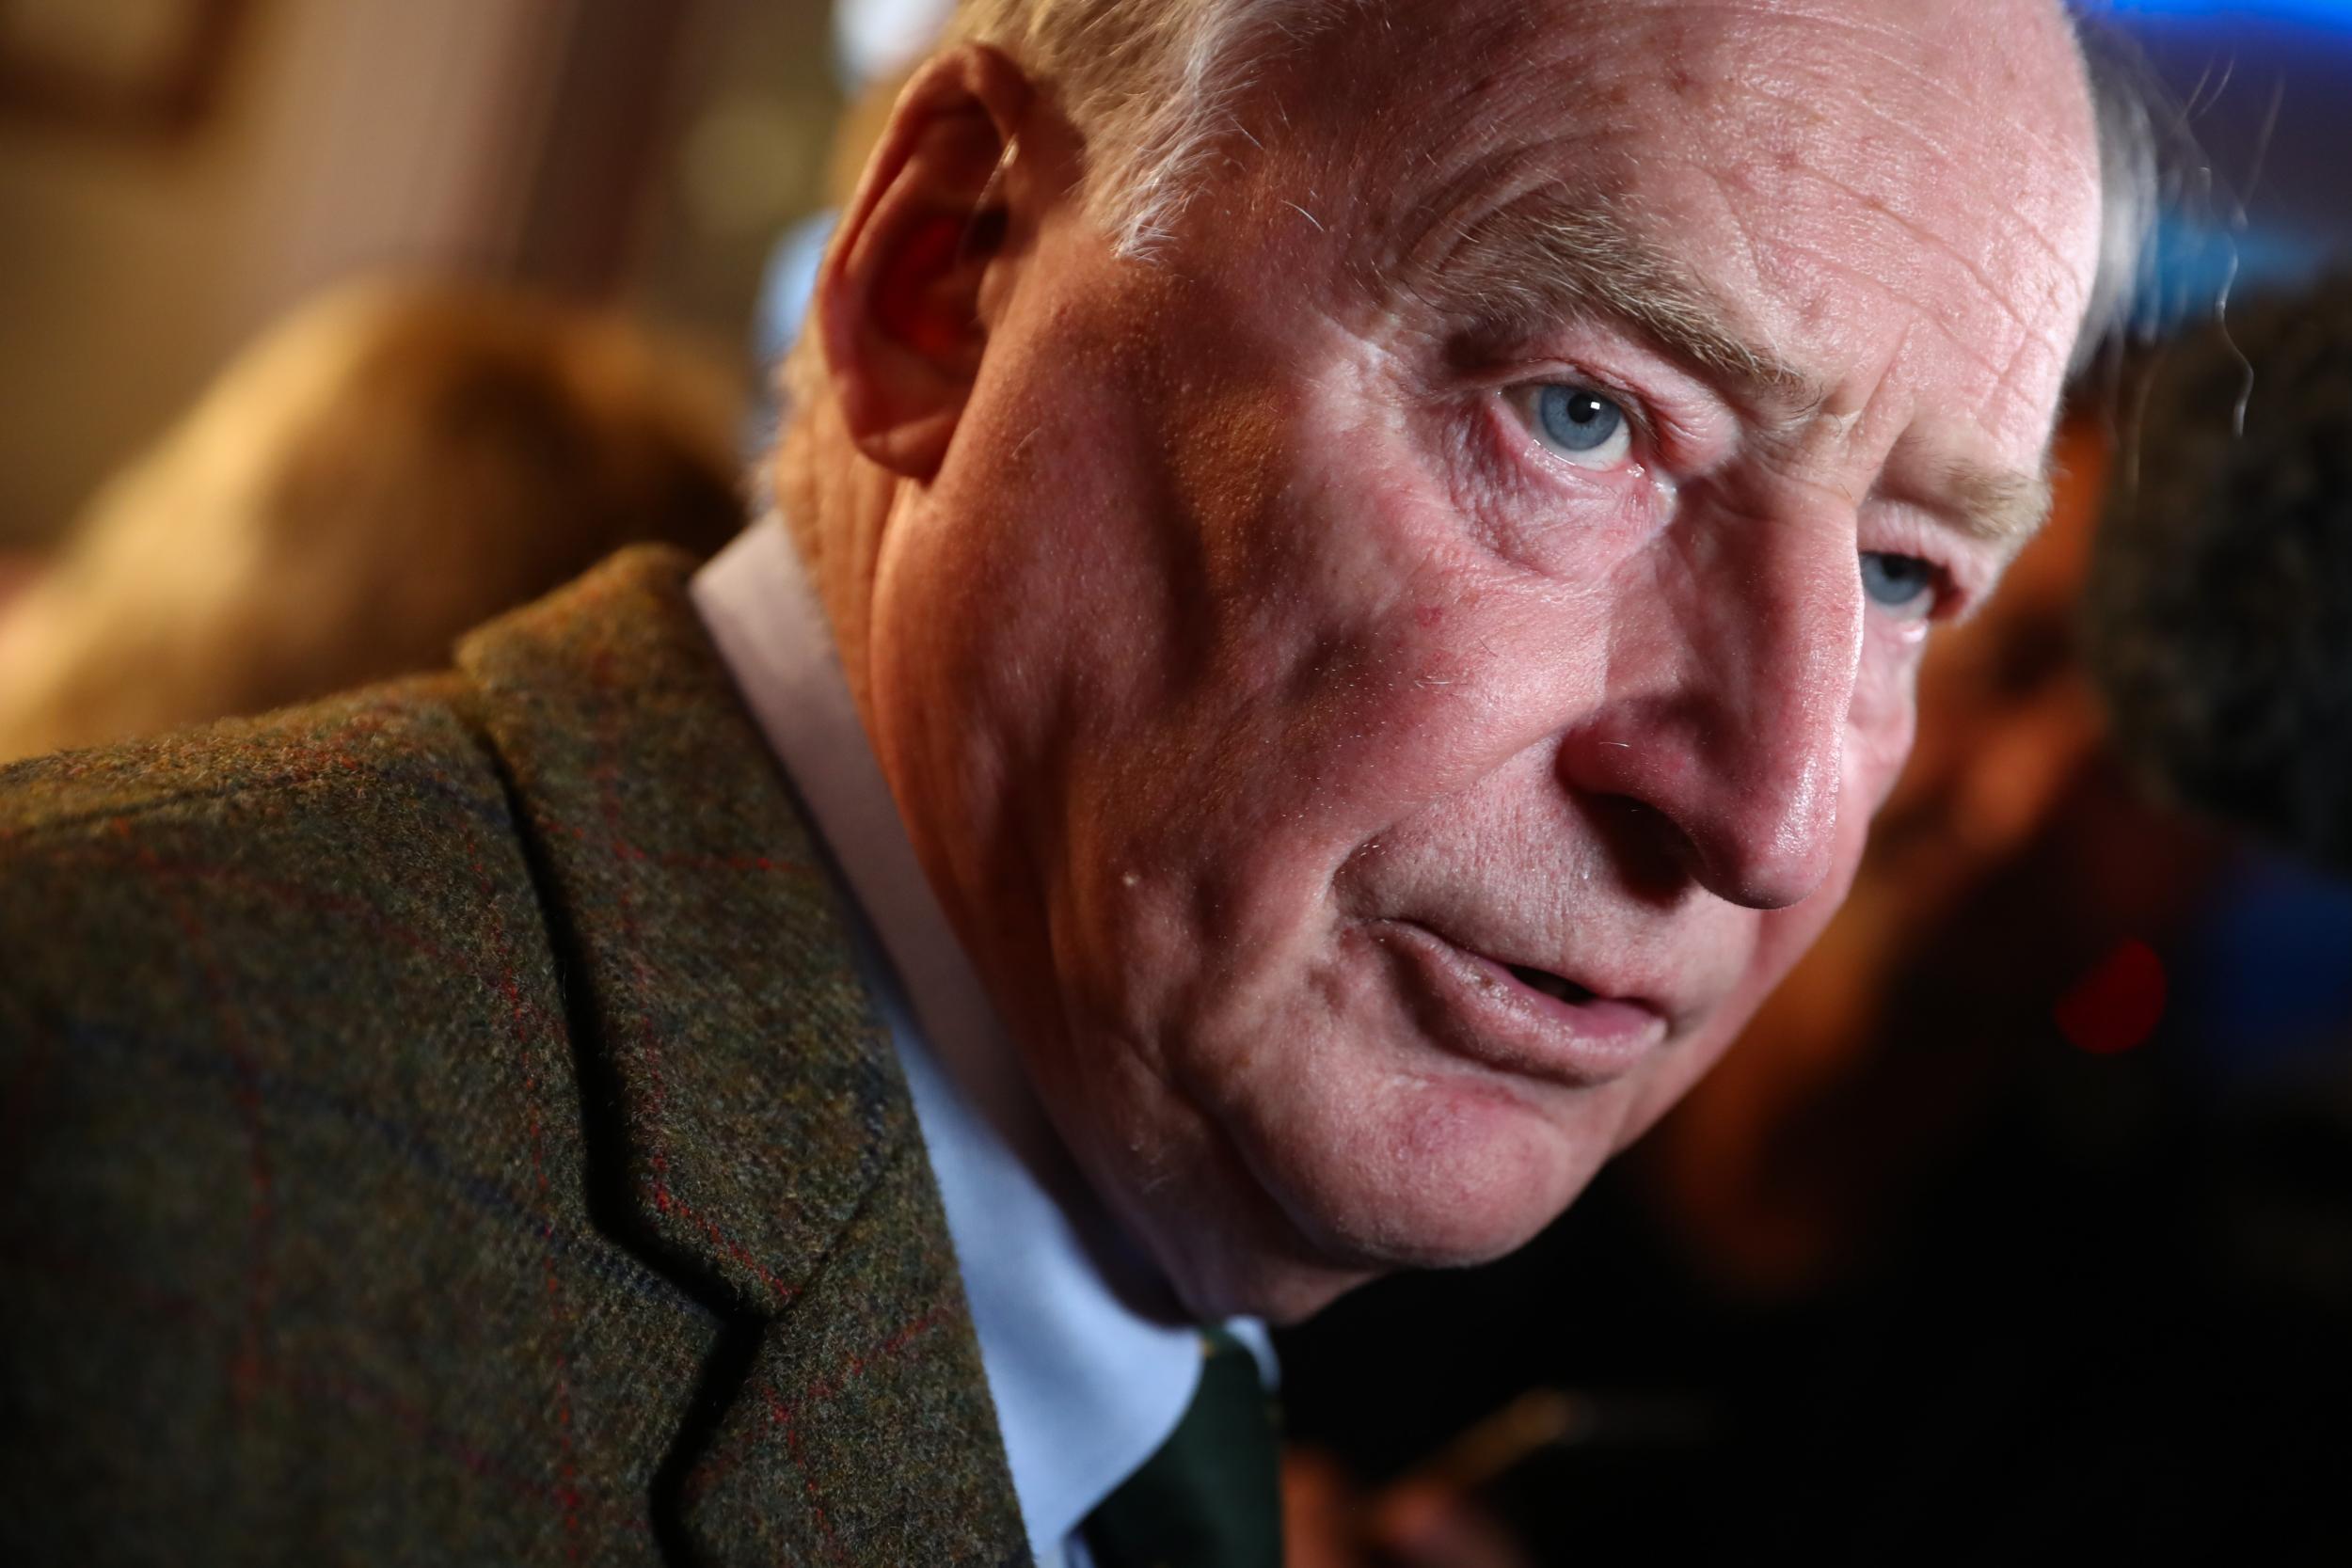 Mr Gauland co-leads Alternative for Germany (AfD), which is now the third-largest political party in Germany